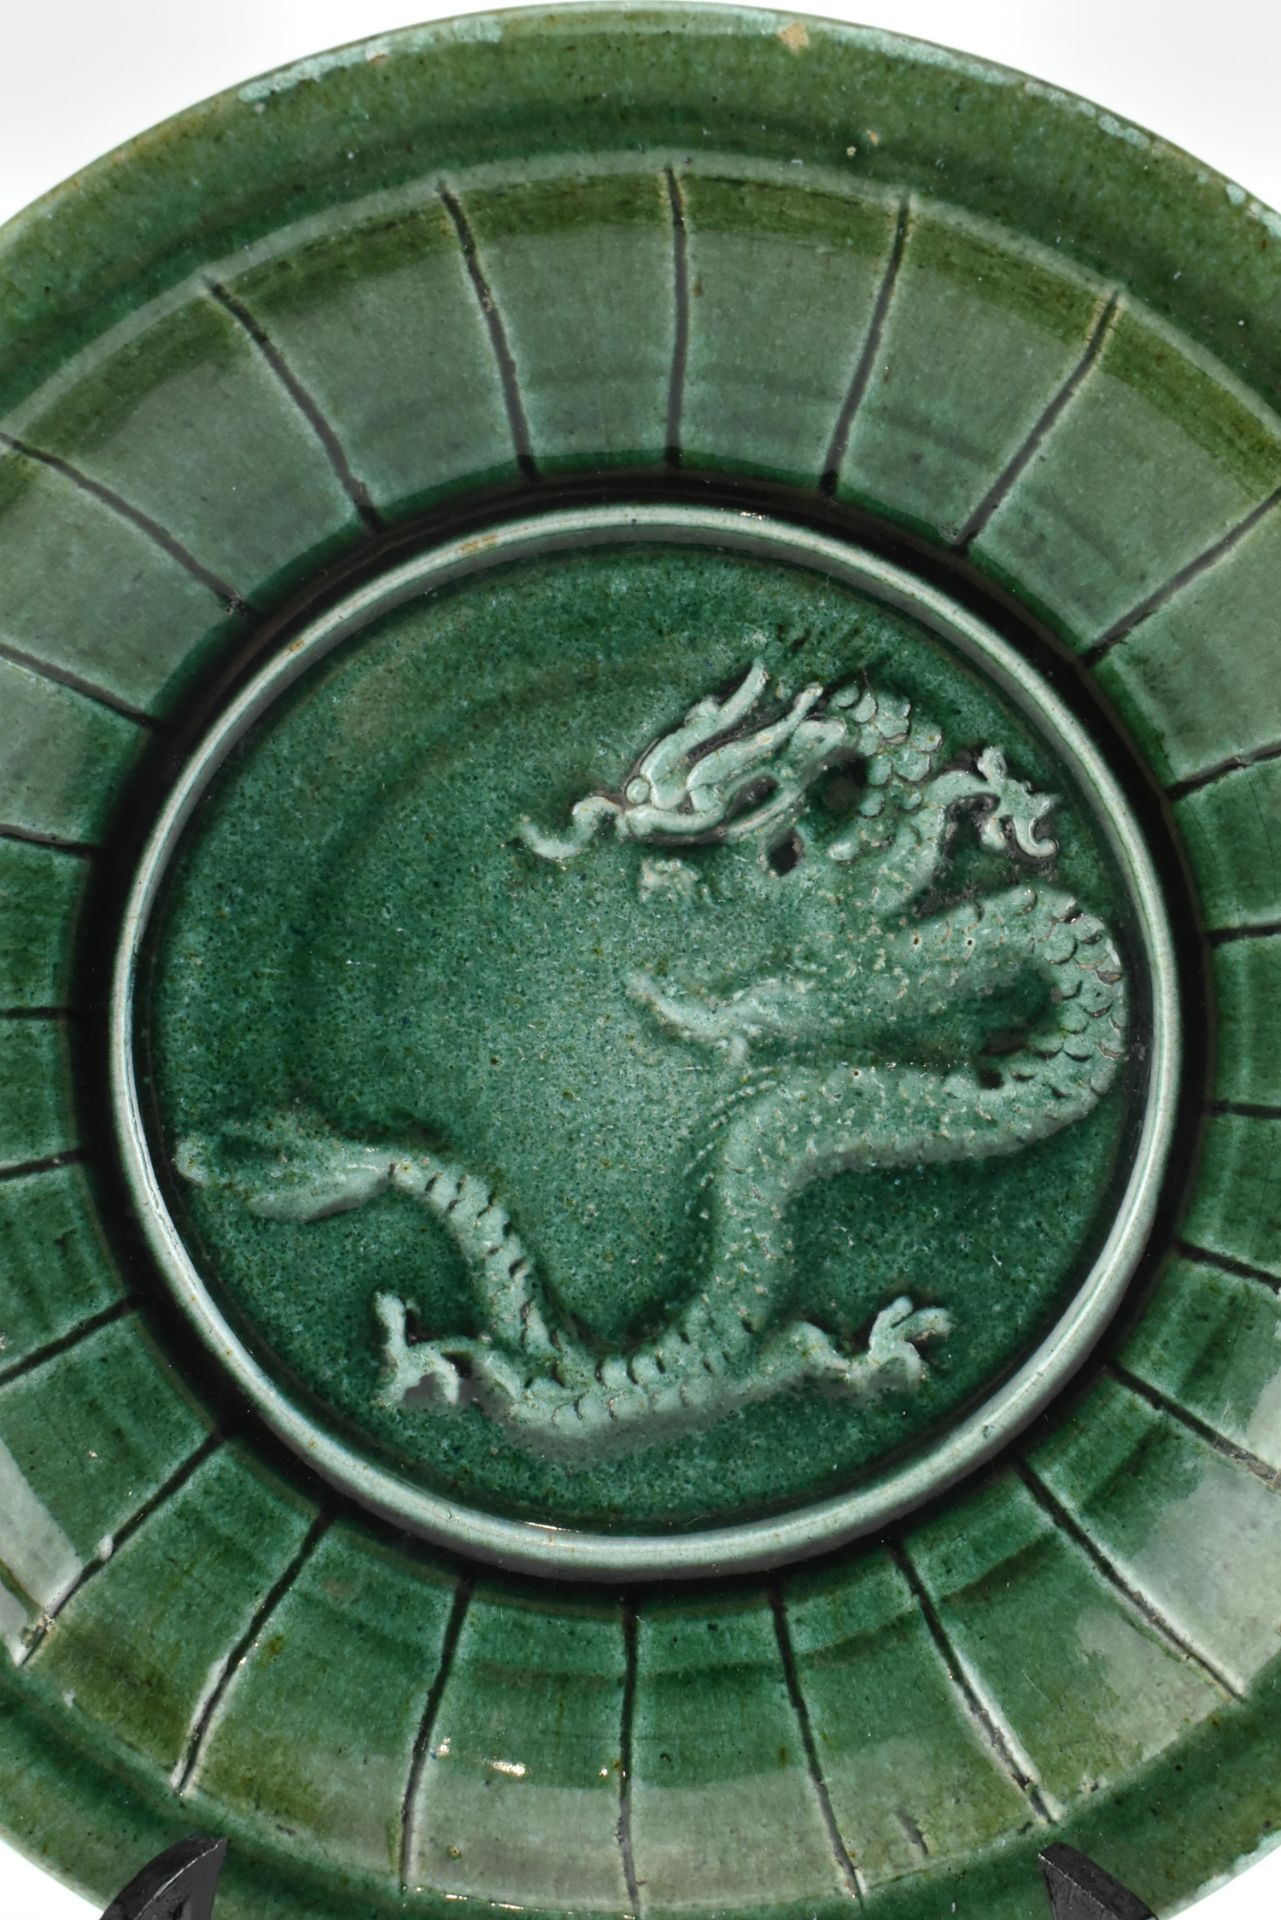 STONEWARE GREEN GLAZED "DRAGON" RELIEF CHARGER 绿釉三爪龙浮雕盘 - Image 2 of 6